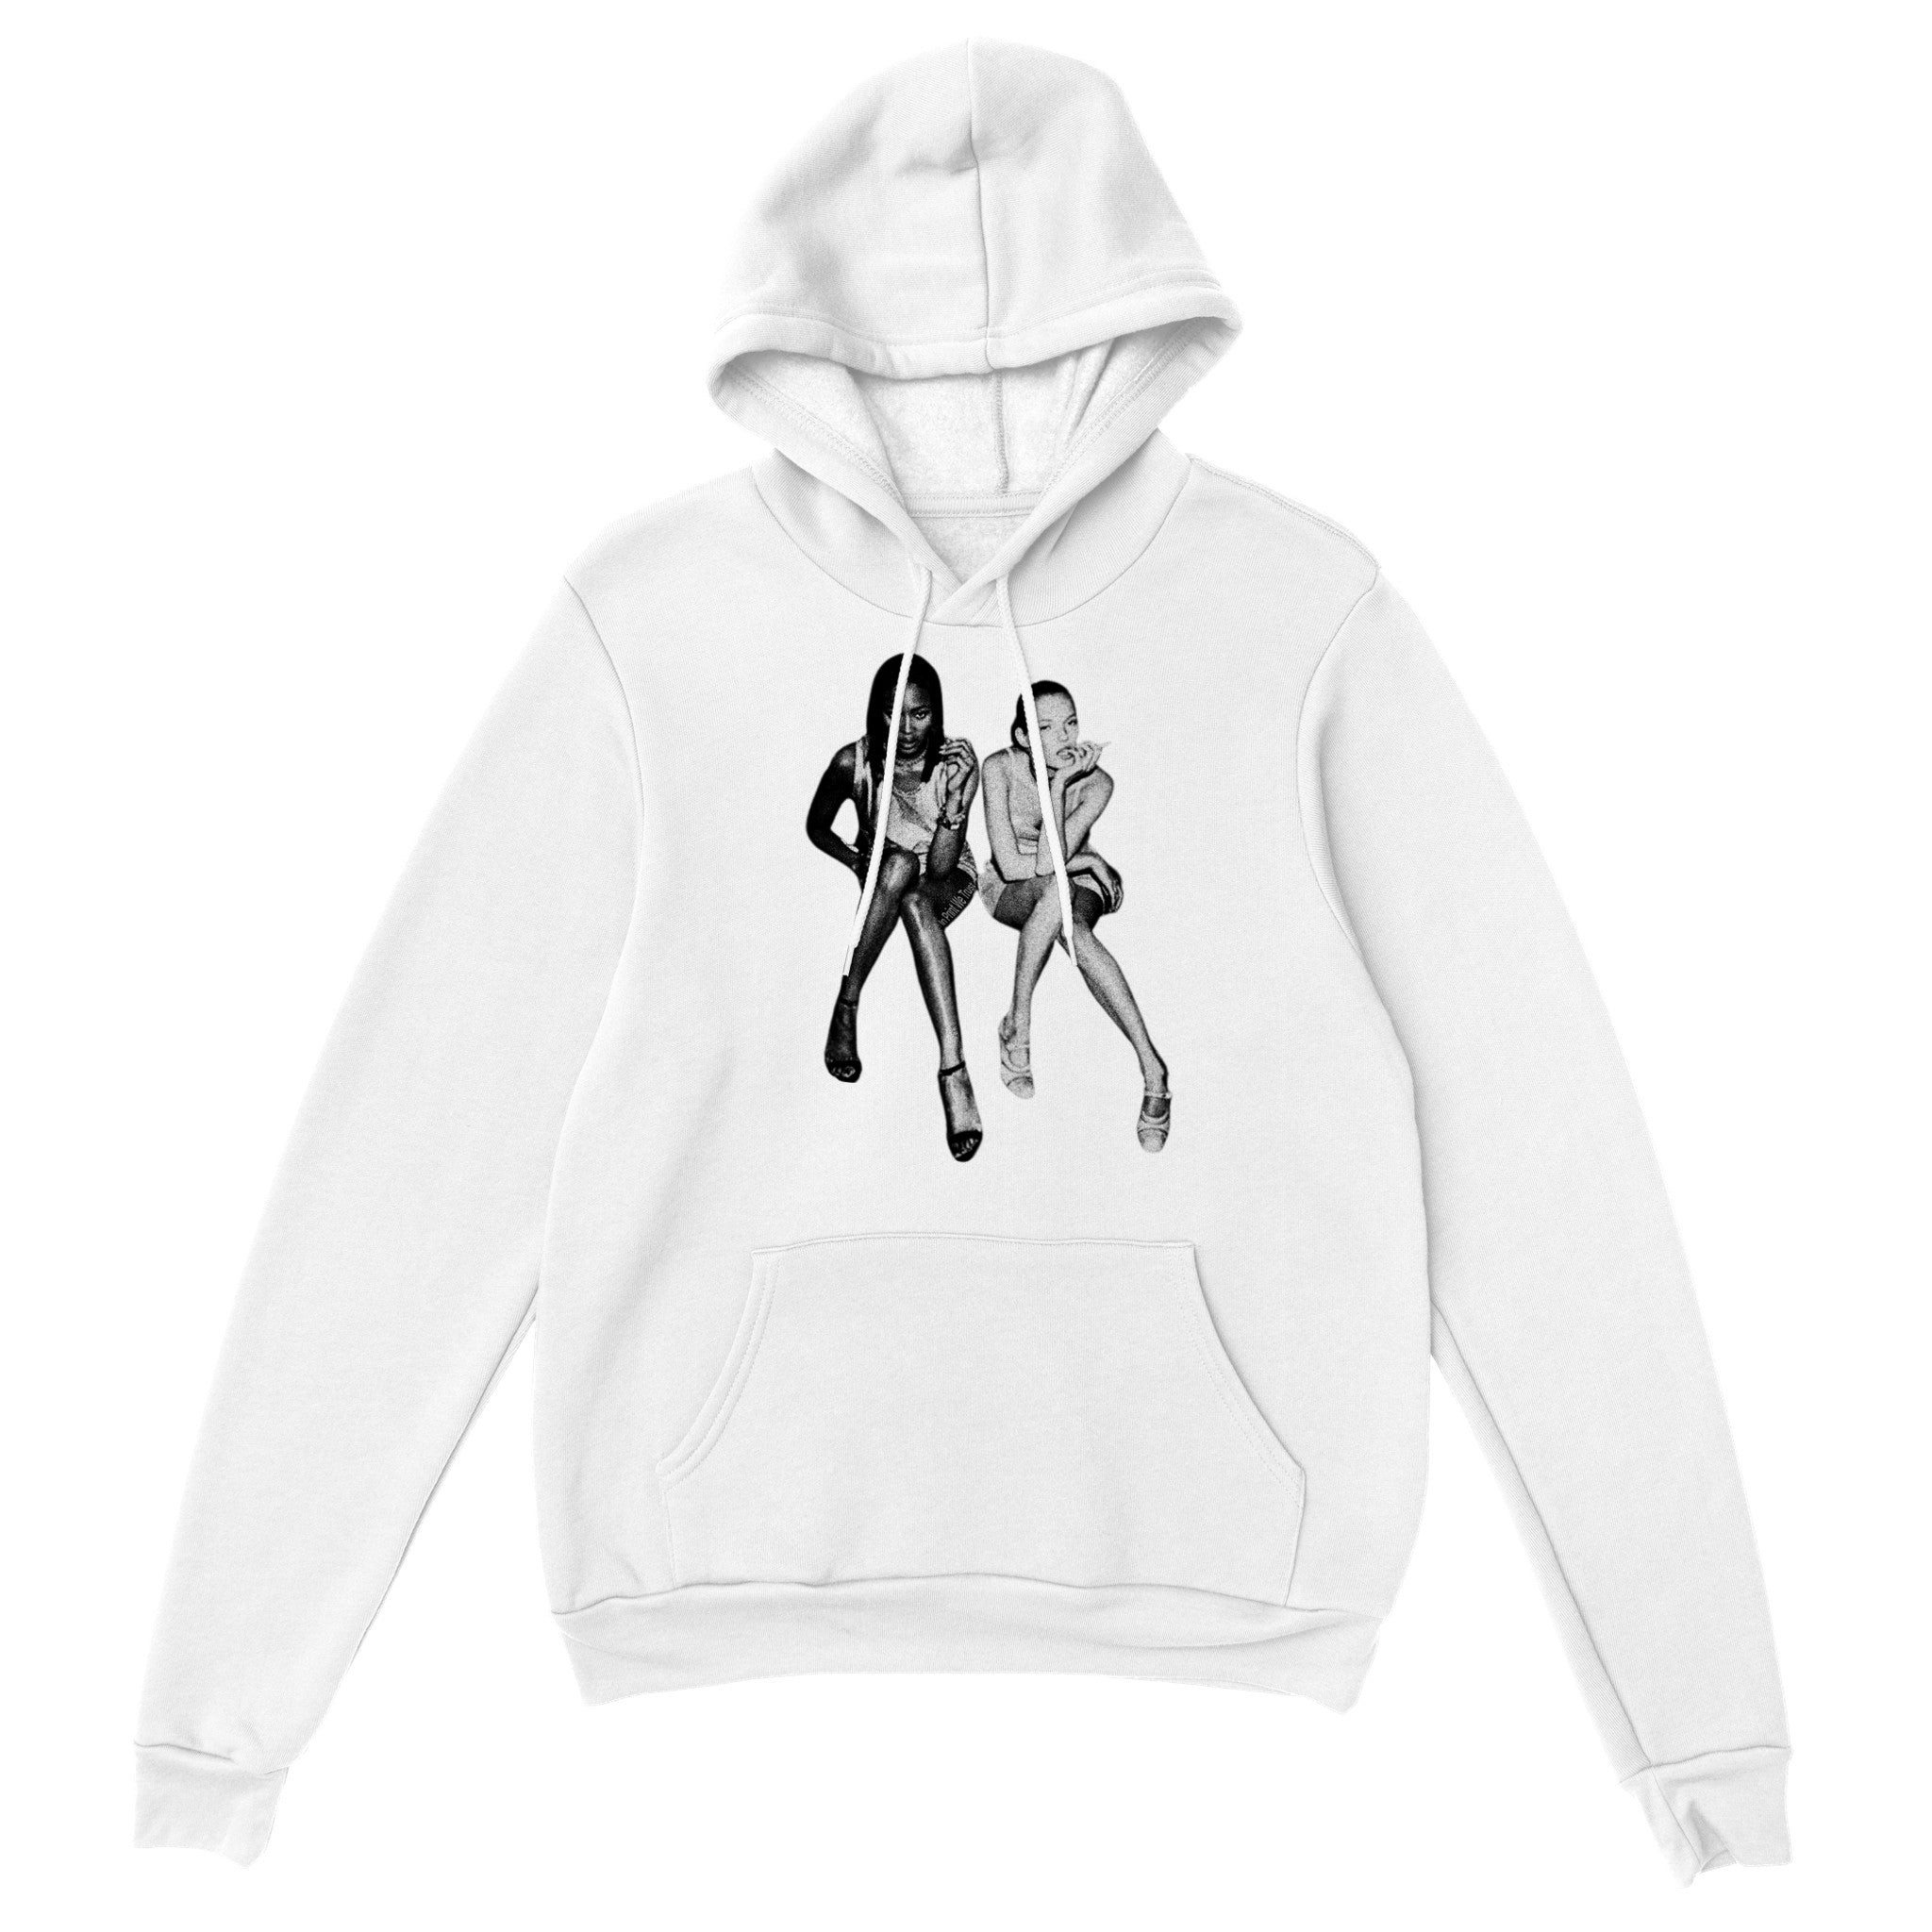 'After Party' hoodie - In Print We Trust